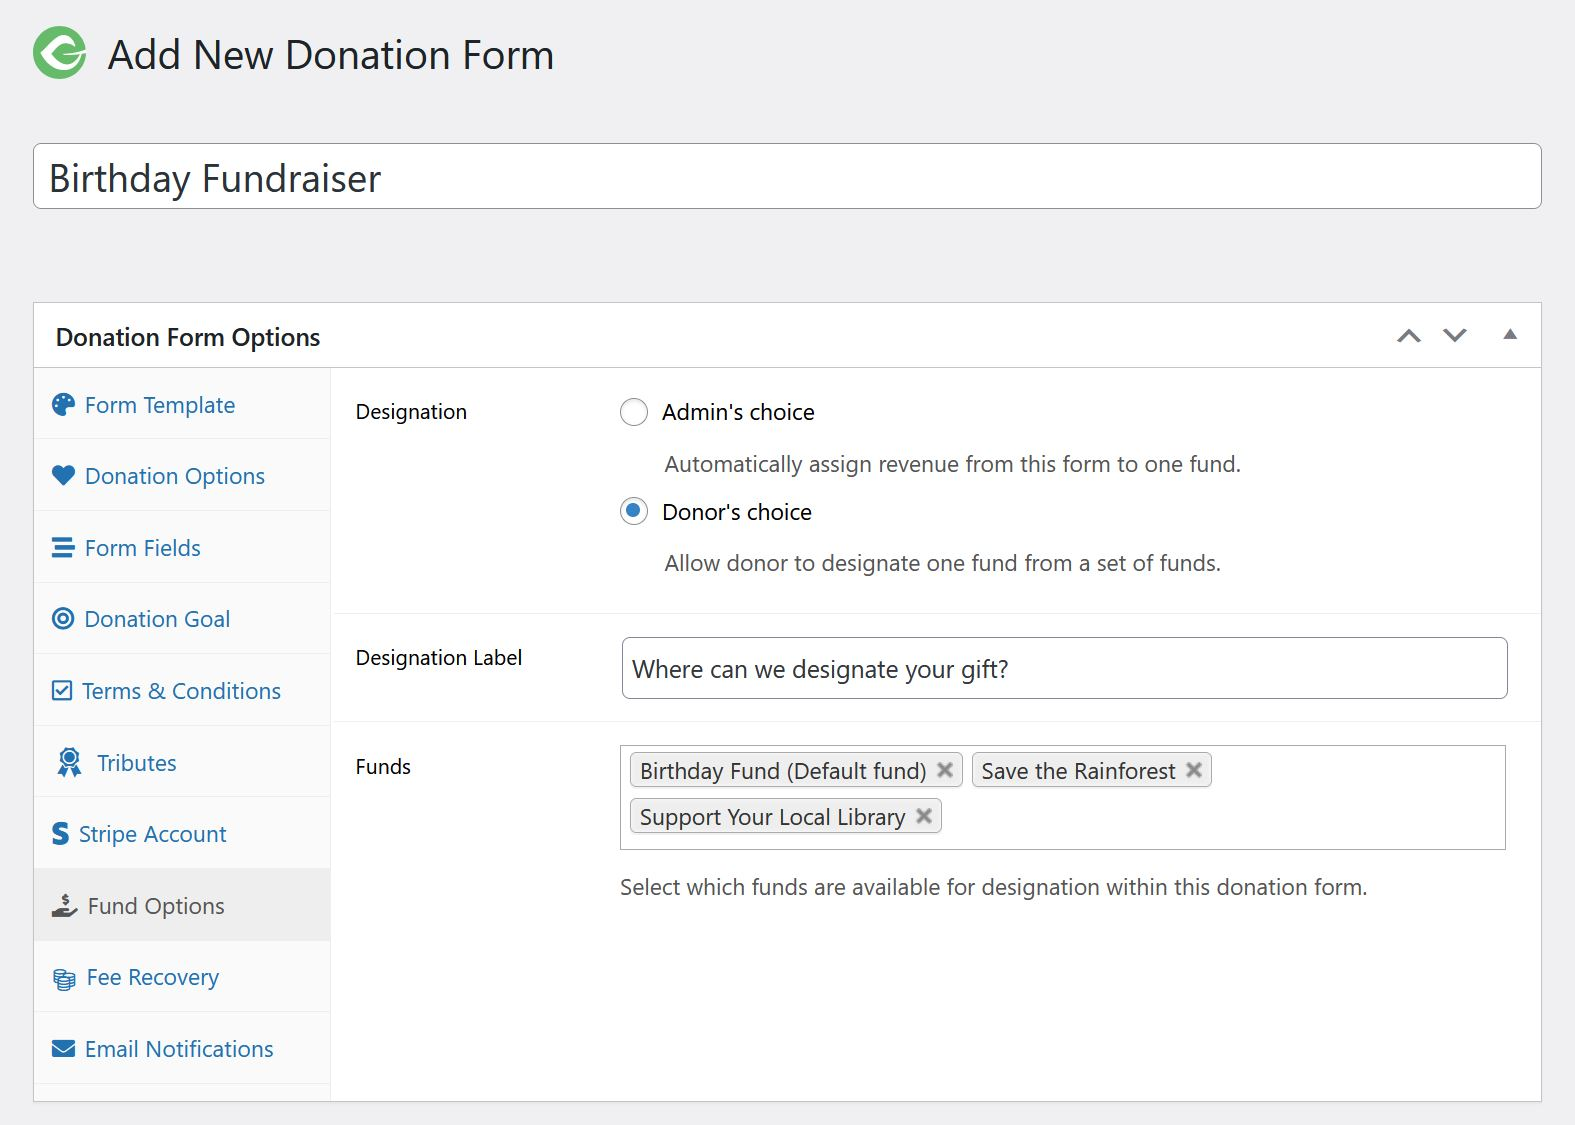 You will need a birthday fundraiser donation form for your birthday campaign. Create a new one and enable funds and designations if you want to add levels of choices.